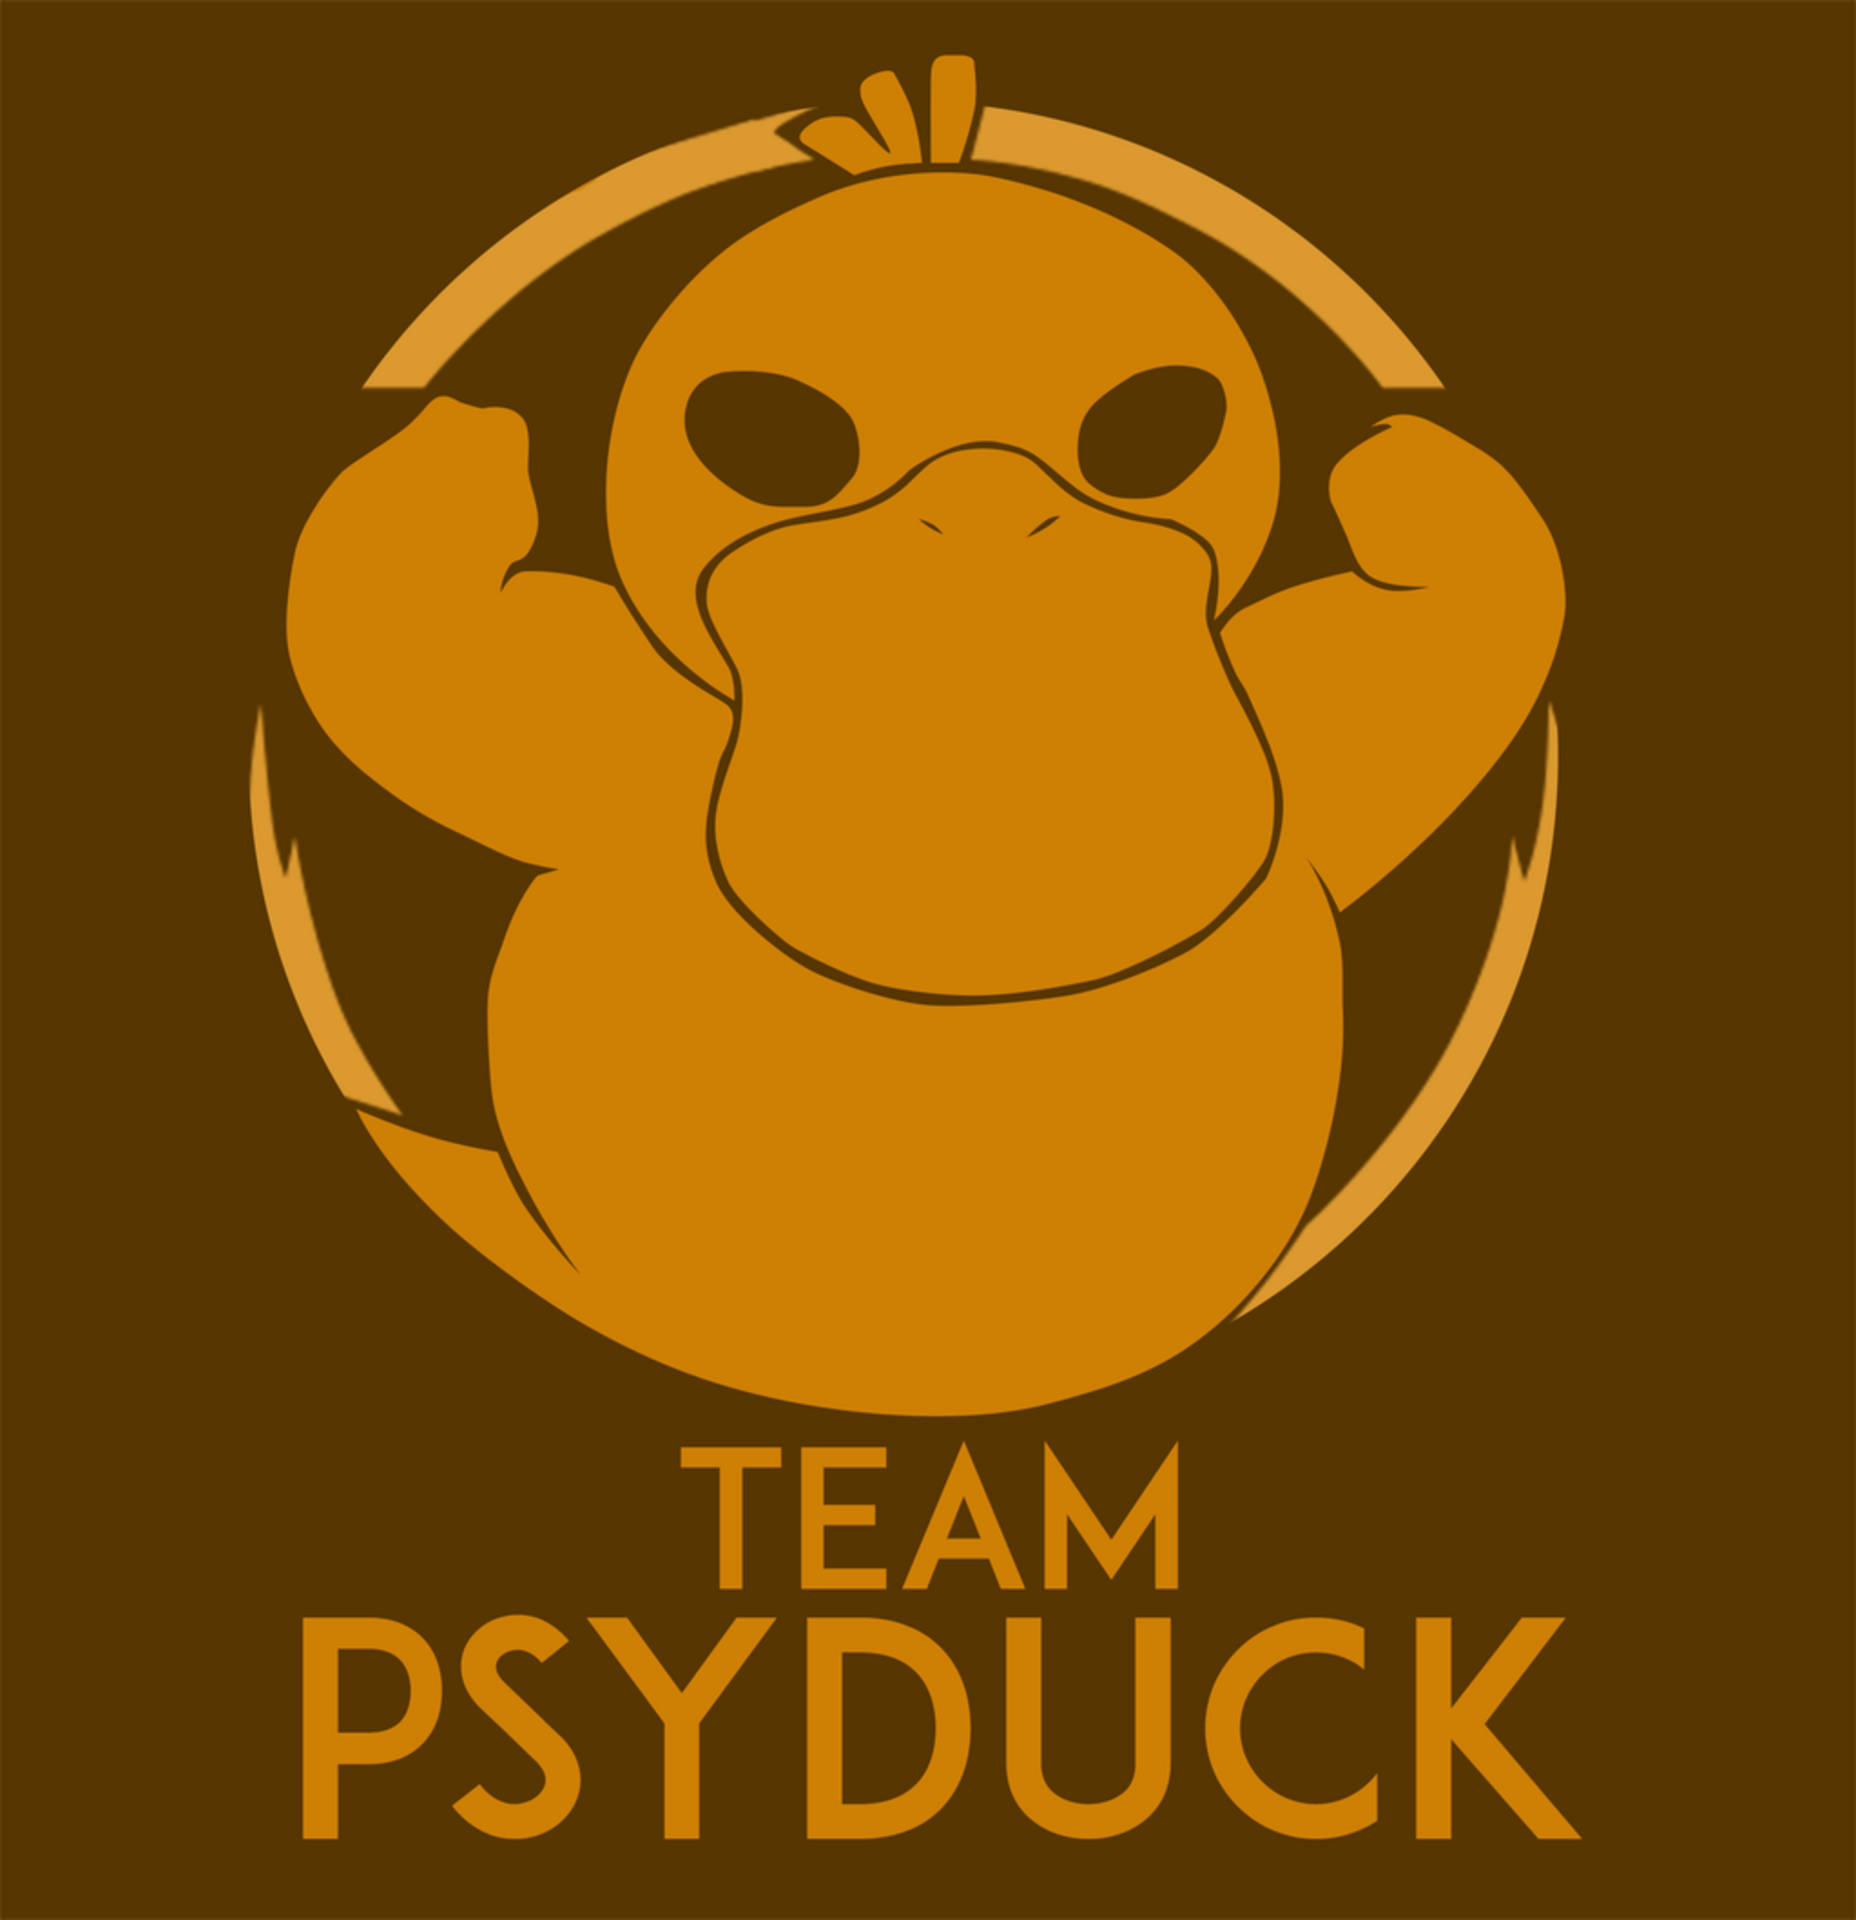 Have You Met Psyduck? Background